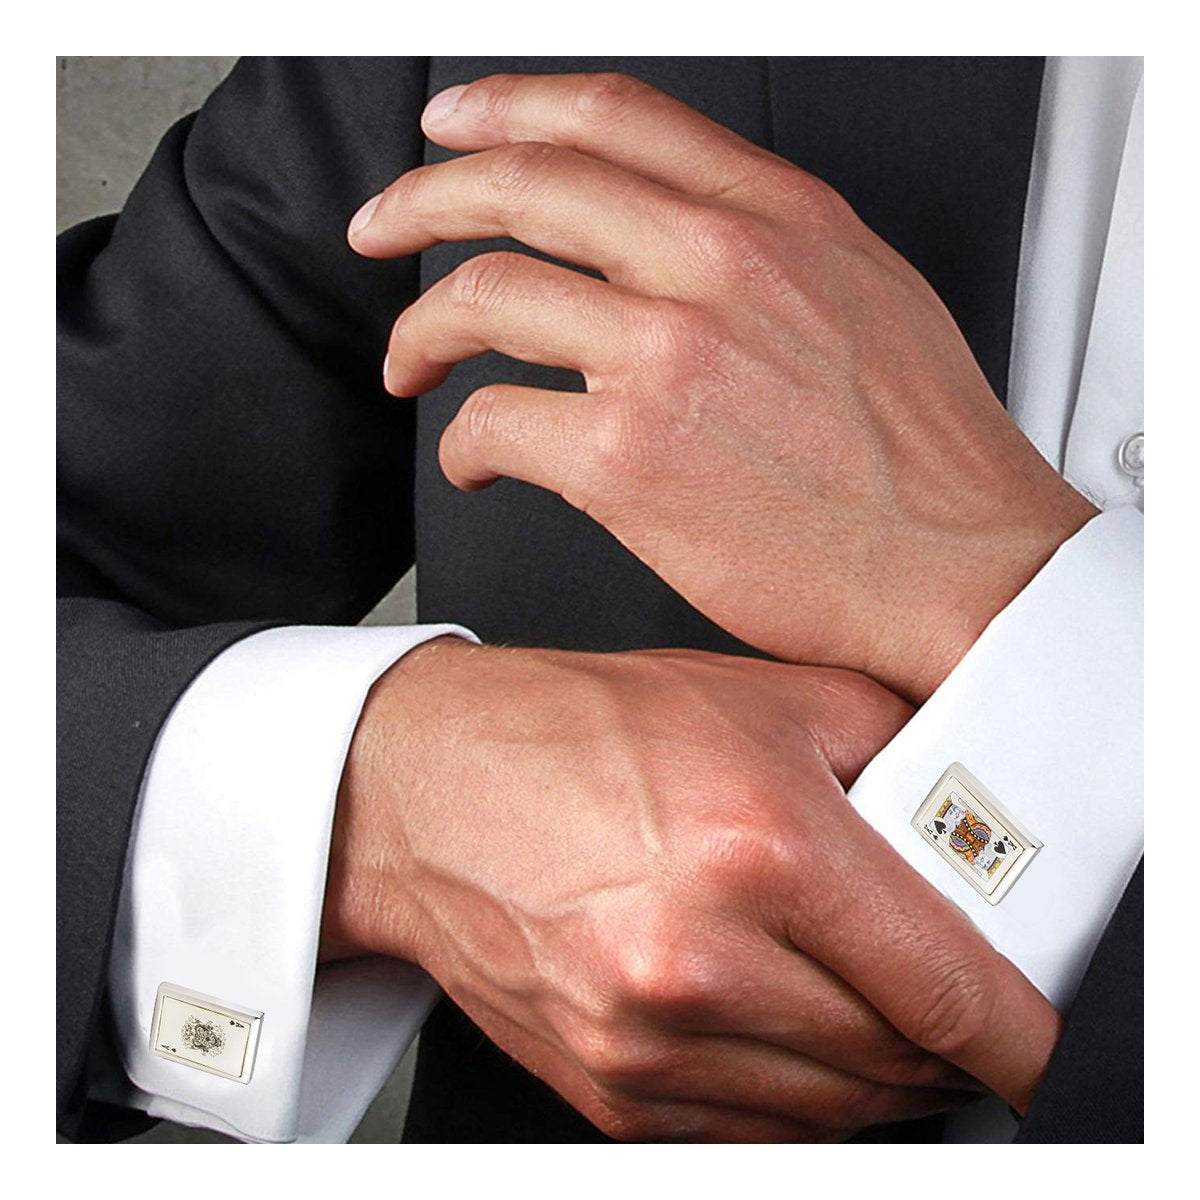 Ace King Playing Cards White Cufflinks In Box